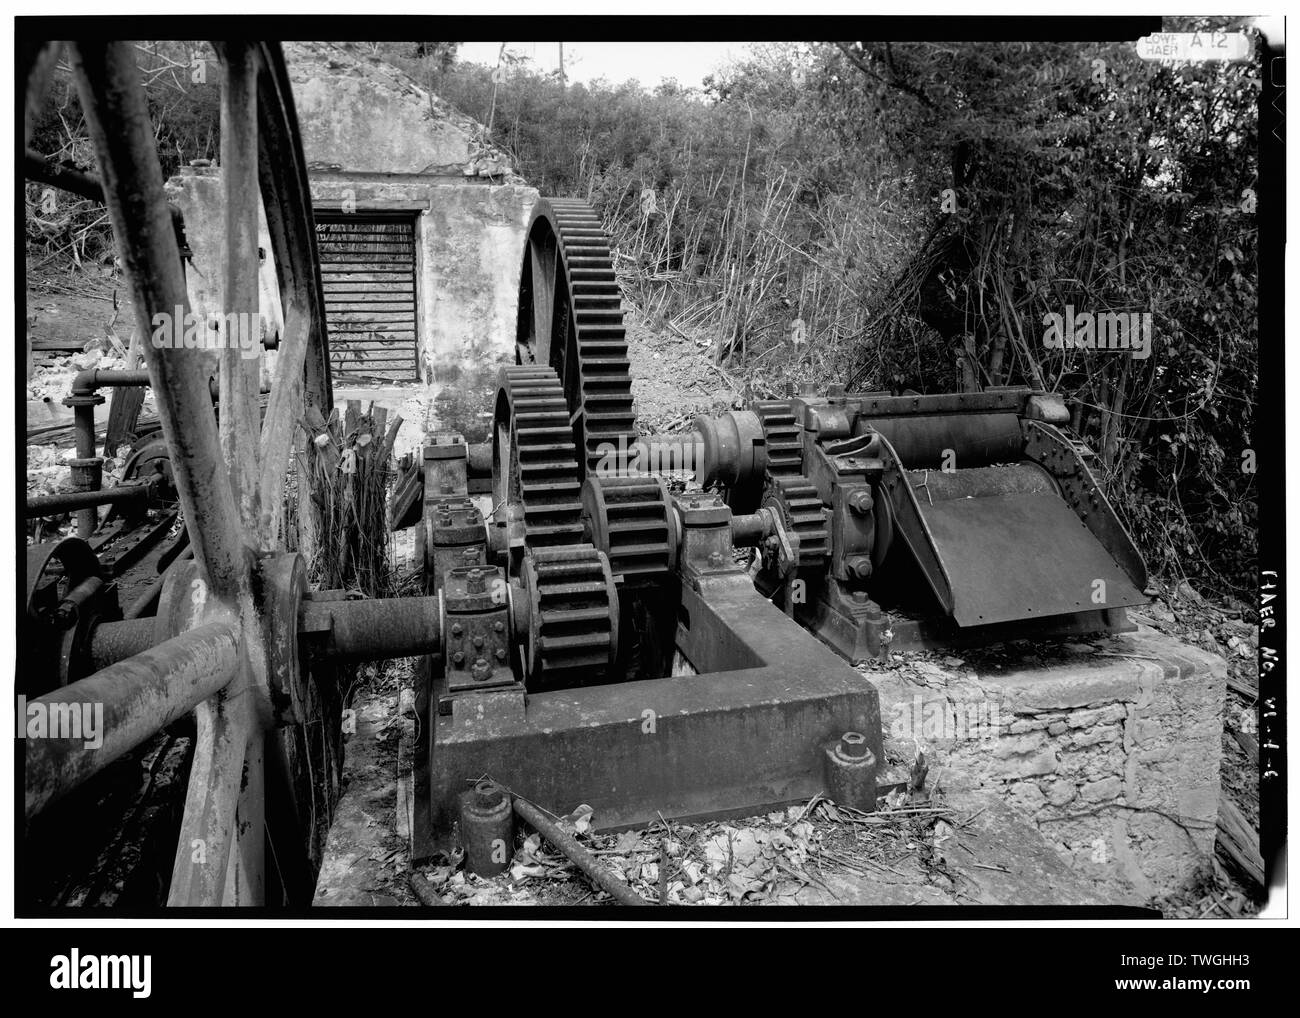 REDUCTION GEARS and CANE CRUSHER, FROM THE EAST - Estate Clifton Hill, Sugar Factory and Rum Distillery, South Central Street, Christiansted, St. Croix, VI; Marcoe, Peter; Marcoe, M H; Seaton, H, Jr; Seaton, Manning; Seaton, H, Sr; O'Reilly, Charles; Donocho, Charles; Jacobs, H; Quaile, Joseph; Percy, H; Switzer, E; Hoffmann, Axel; D Stewart and Company Ltd; Hoffmann, Marie; Austin Nichols and Company, Inc; Reid, Daniel B, transmitter Stock Photo